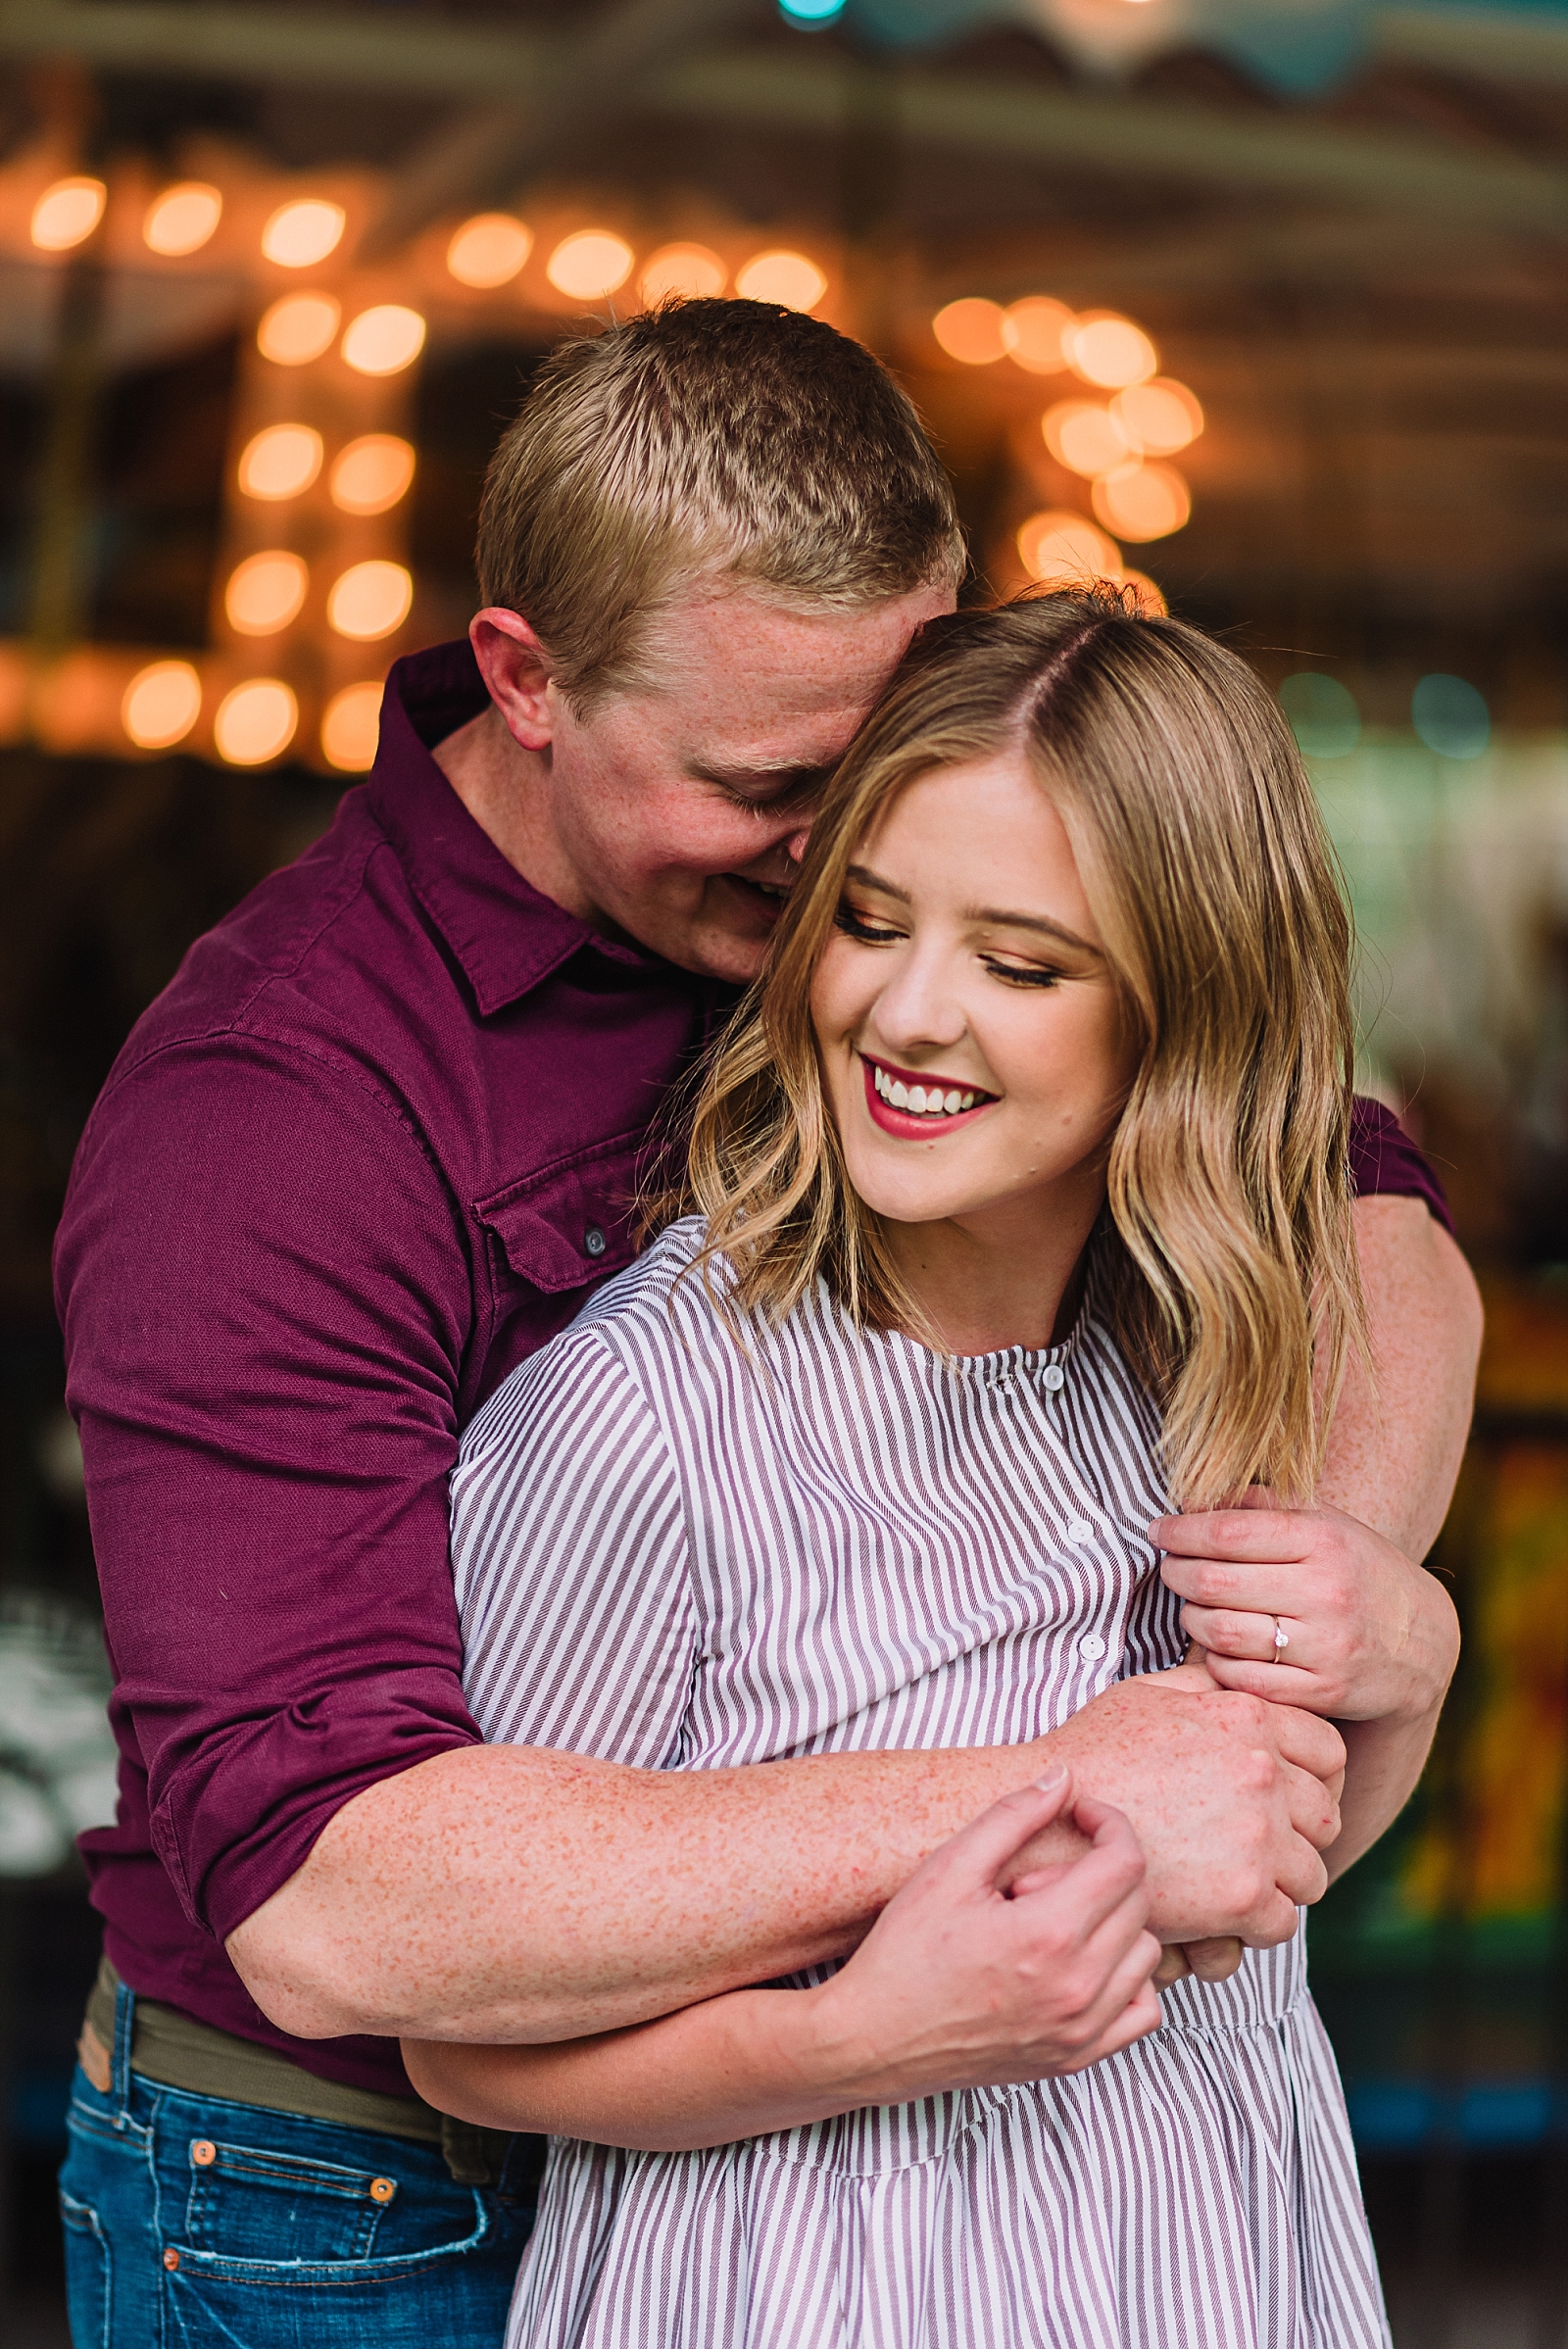 young man and woman hugging and laughing together at rexburg carousel